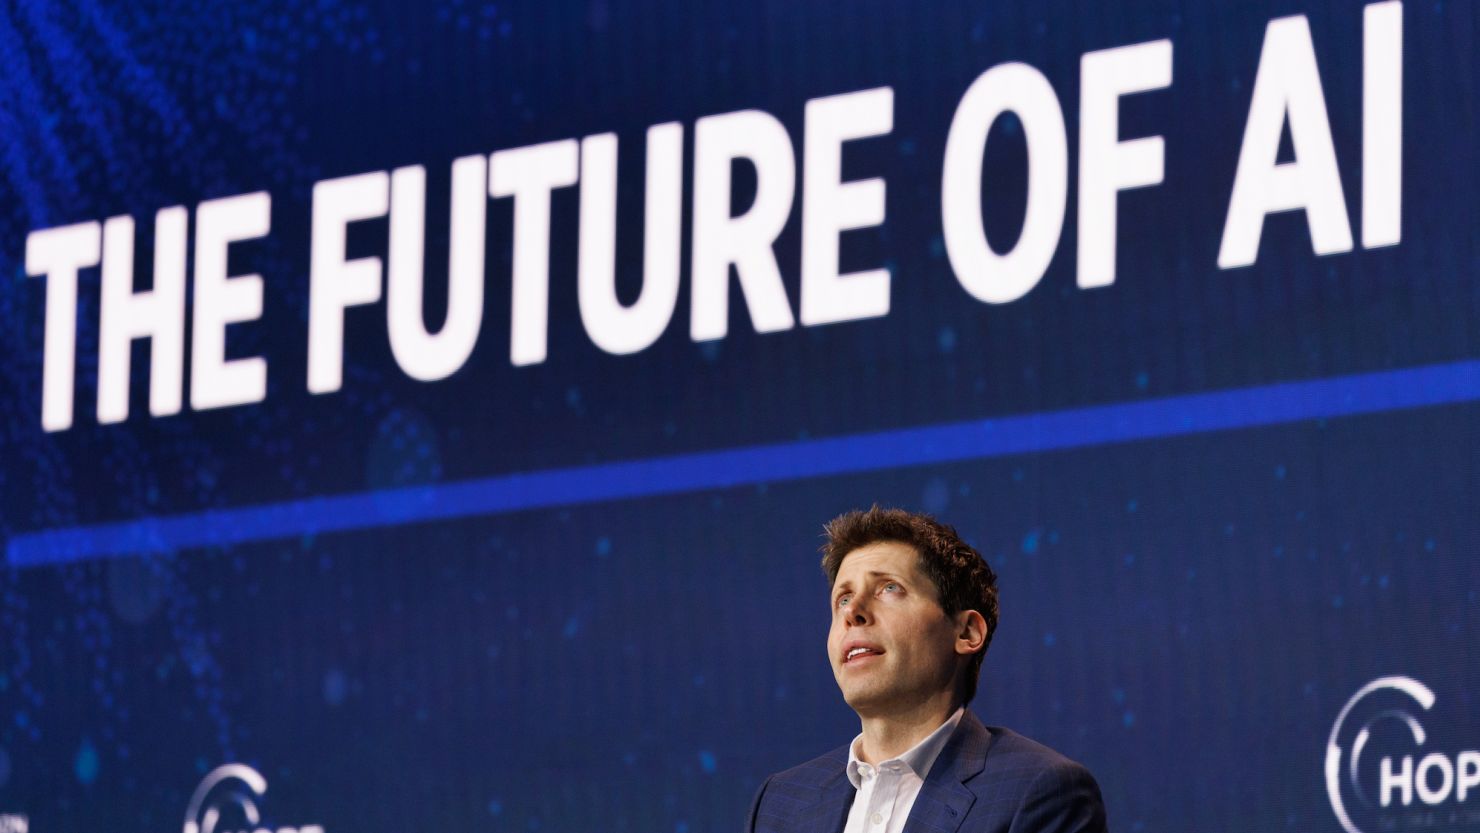 Sam Altman, chief executive officer of OpenAI, at the Hope Global Forums annual meeting in Atlanta, Georgia, US, on Monday, Dec. 11, 2023. The meeting includes over 5,200 delegates representing 40 countries aiming to reimagine the global economy so the benefits and opportunities of free enterprise are extended to everyone. Photographer: Dustin Chambers/Bloomberg